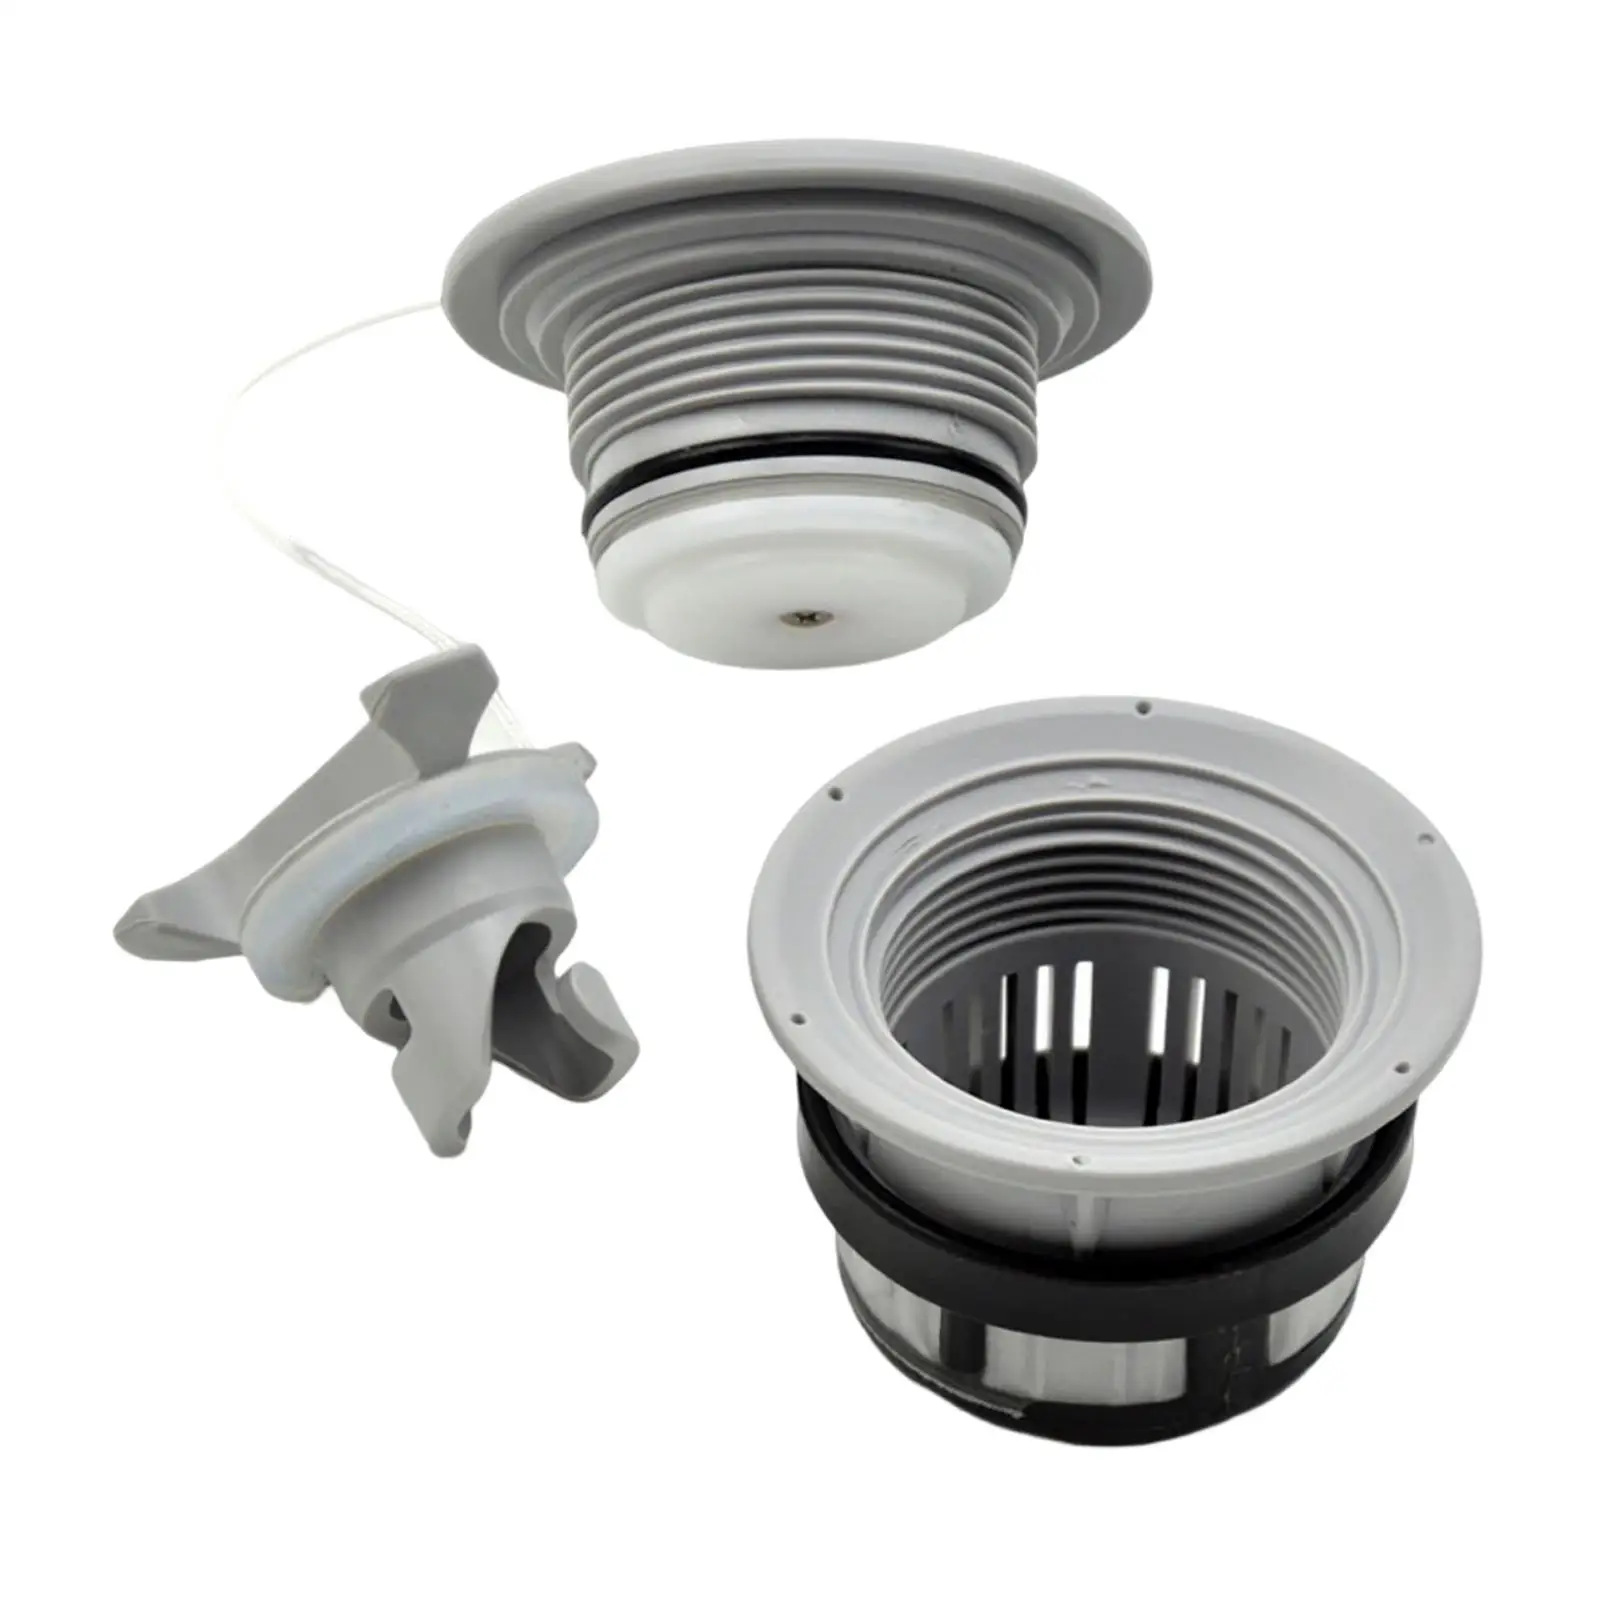 Boat Air Valve Adapter Caps, 6 Groove Gray Air Gas Valve Caps Air Plugs for Inflatable Boat Airbed Boat Raft Canoe Parts